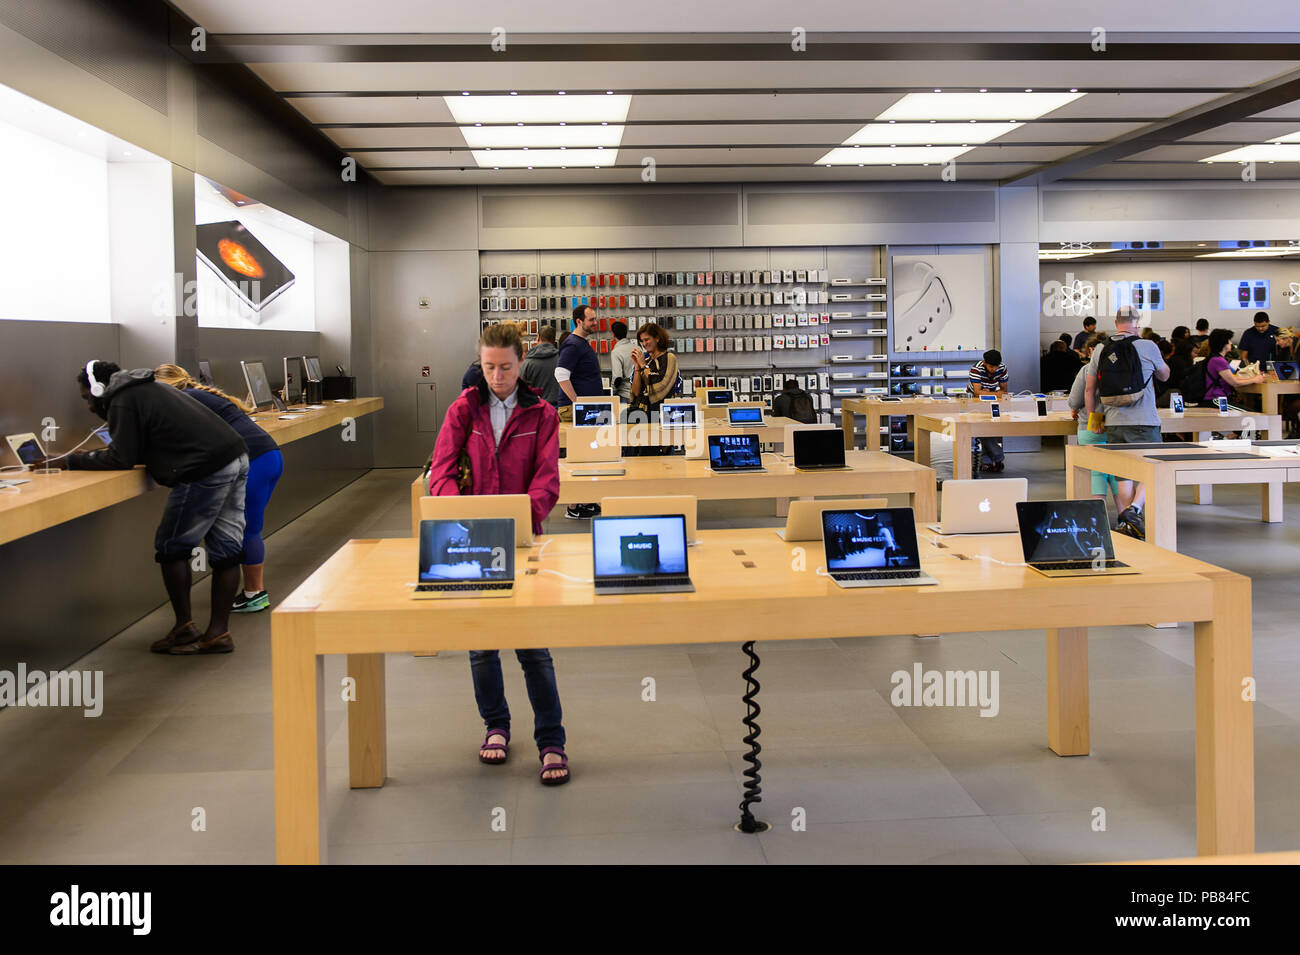 New York Usa Sep 22 2015 Interior Of The Apple Store On